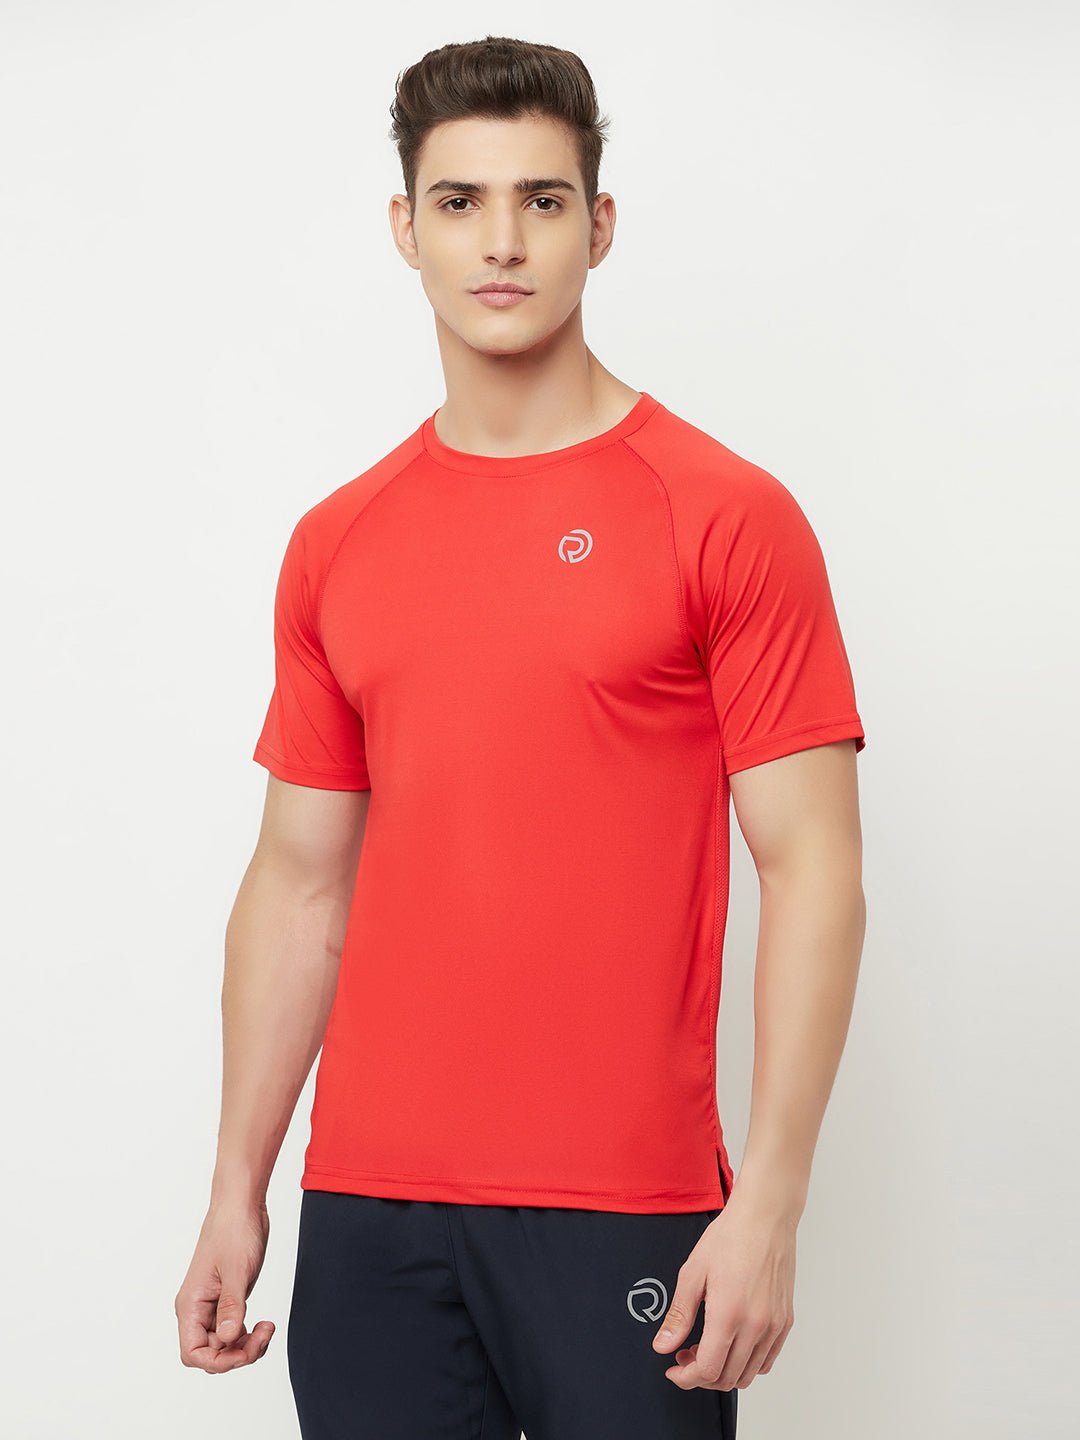 Men's Reflective Dryfit Tshirt with Performance Mesh Back